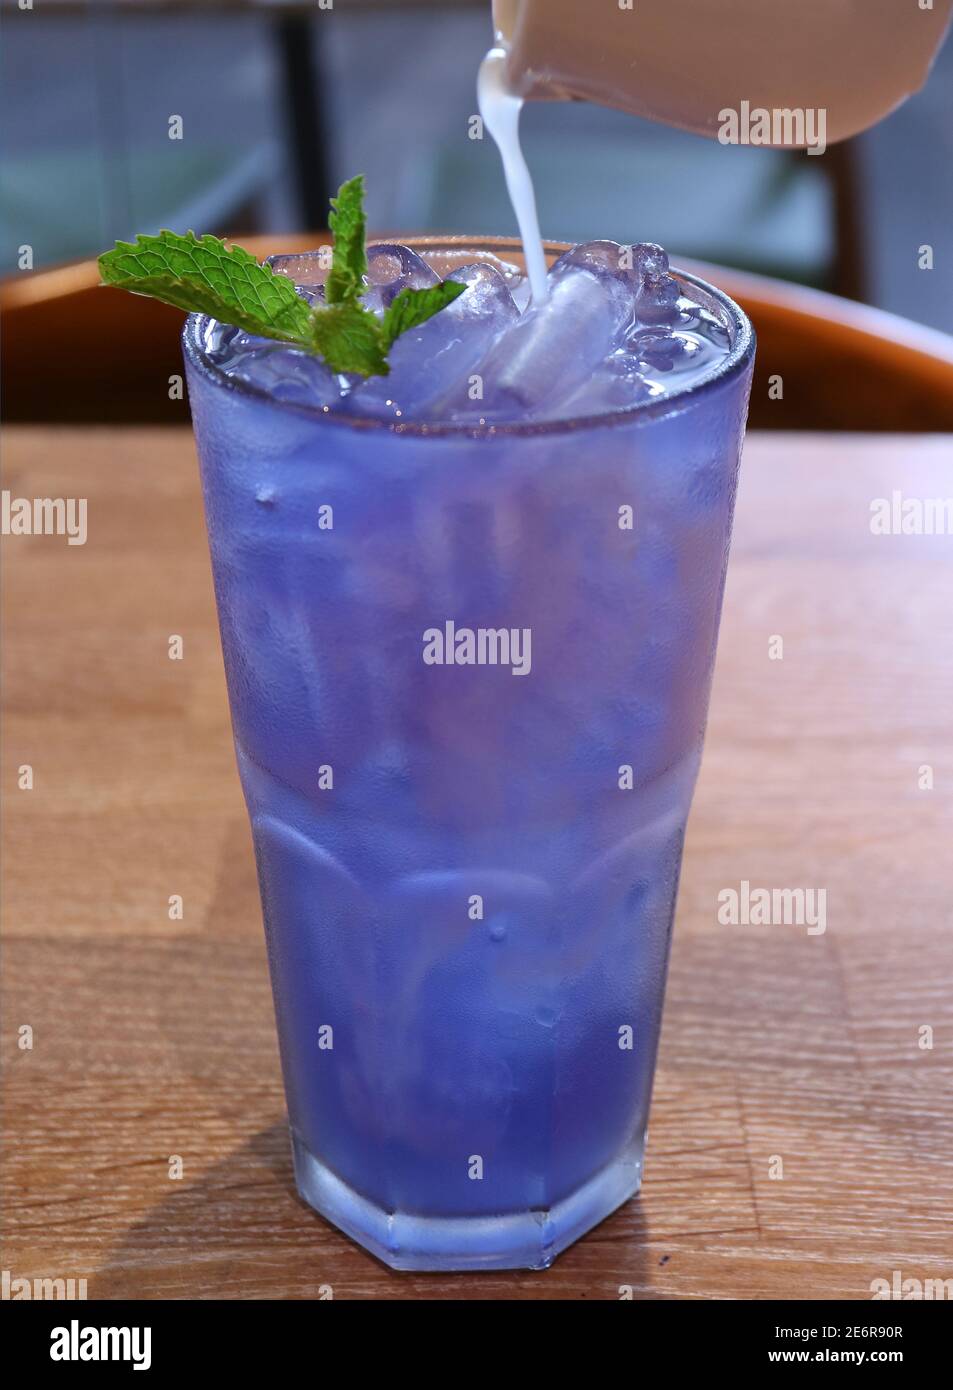 https://c8.alamy.com/comp/2E6R90R/color-of-iced-butterfly-pea-flower-tea-changing-when-being-added-with-some-fresh-lime-juice-2E6R90R.jpg